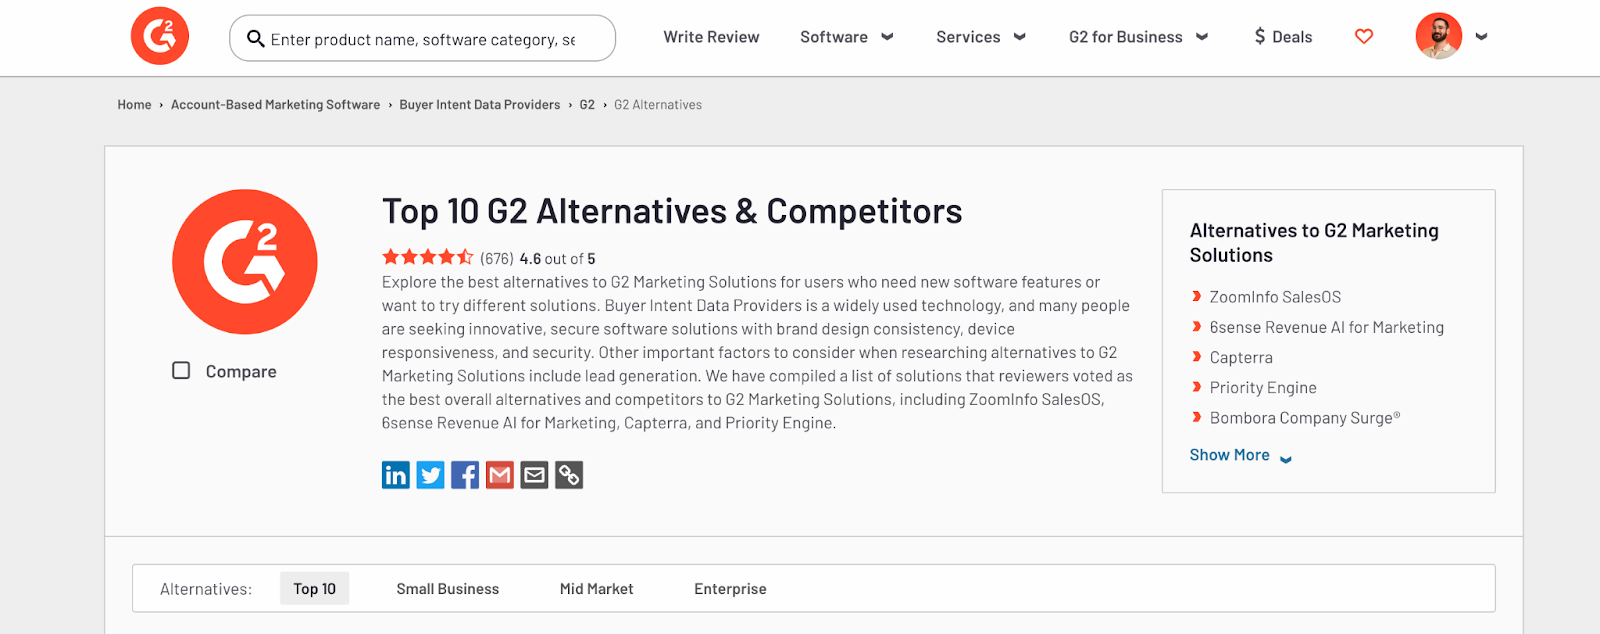 Example alternatives to G2 Marketing Solutions page